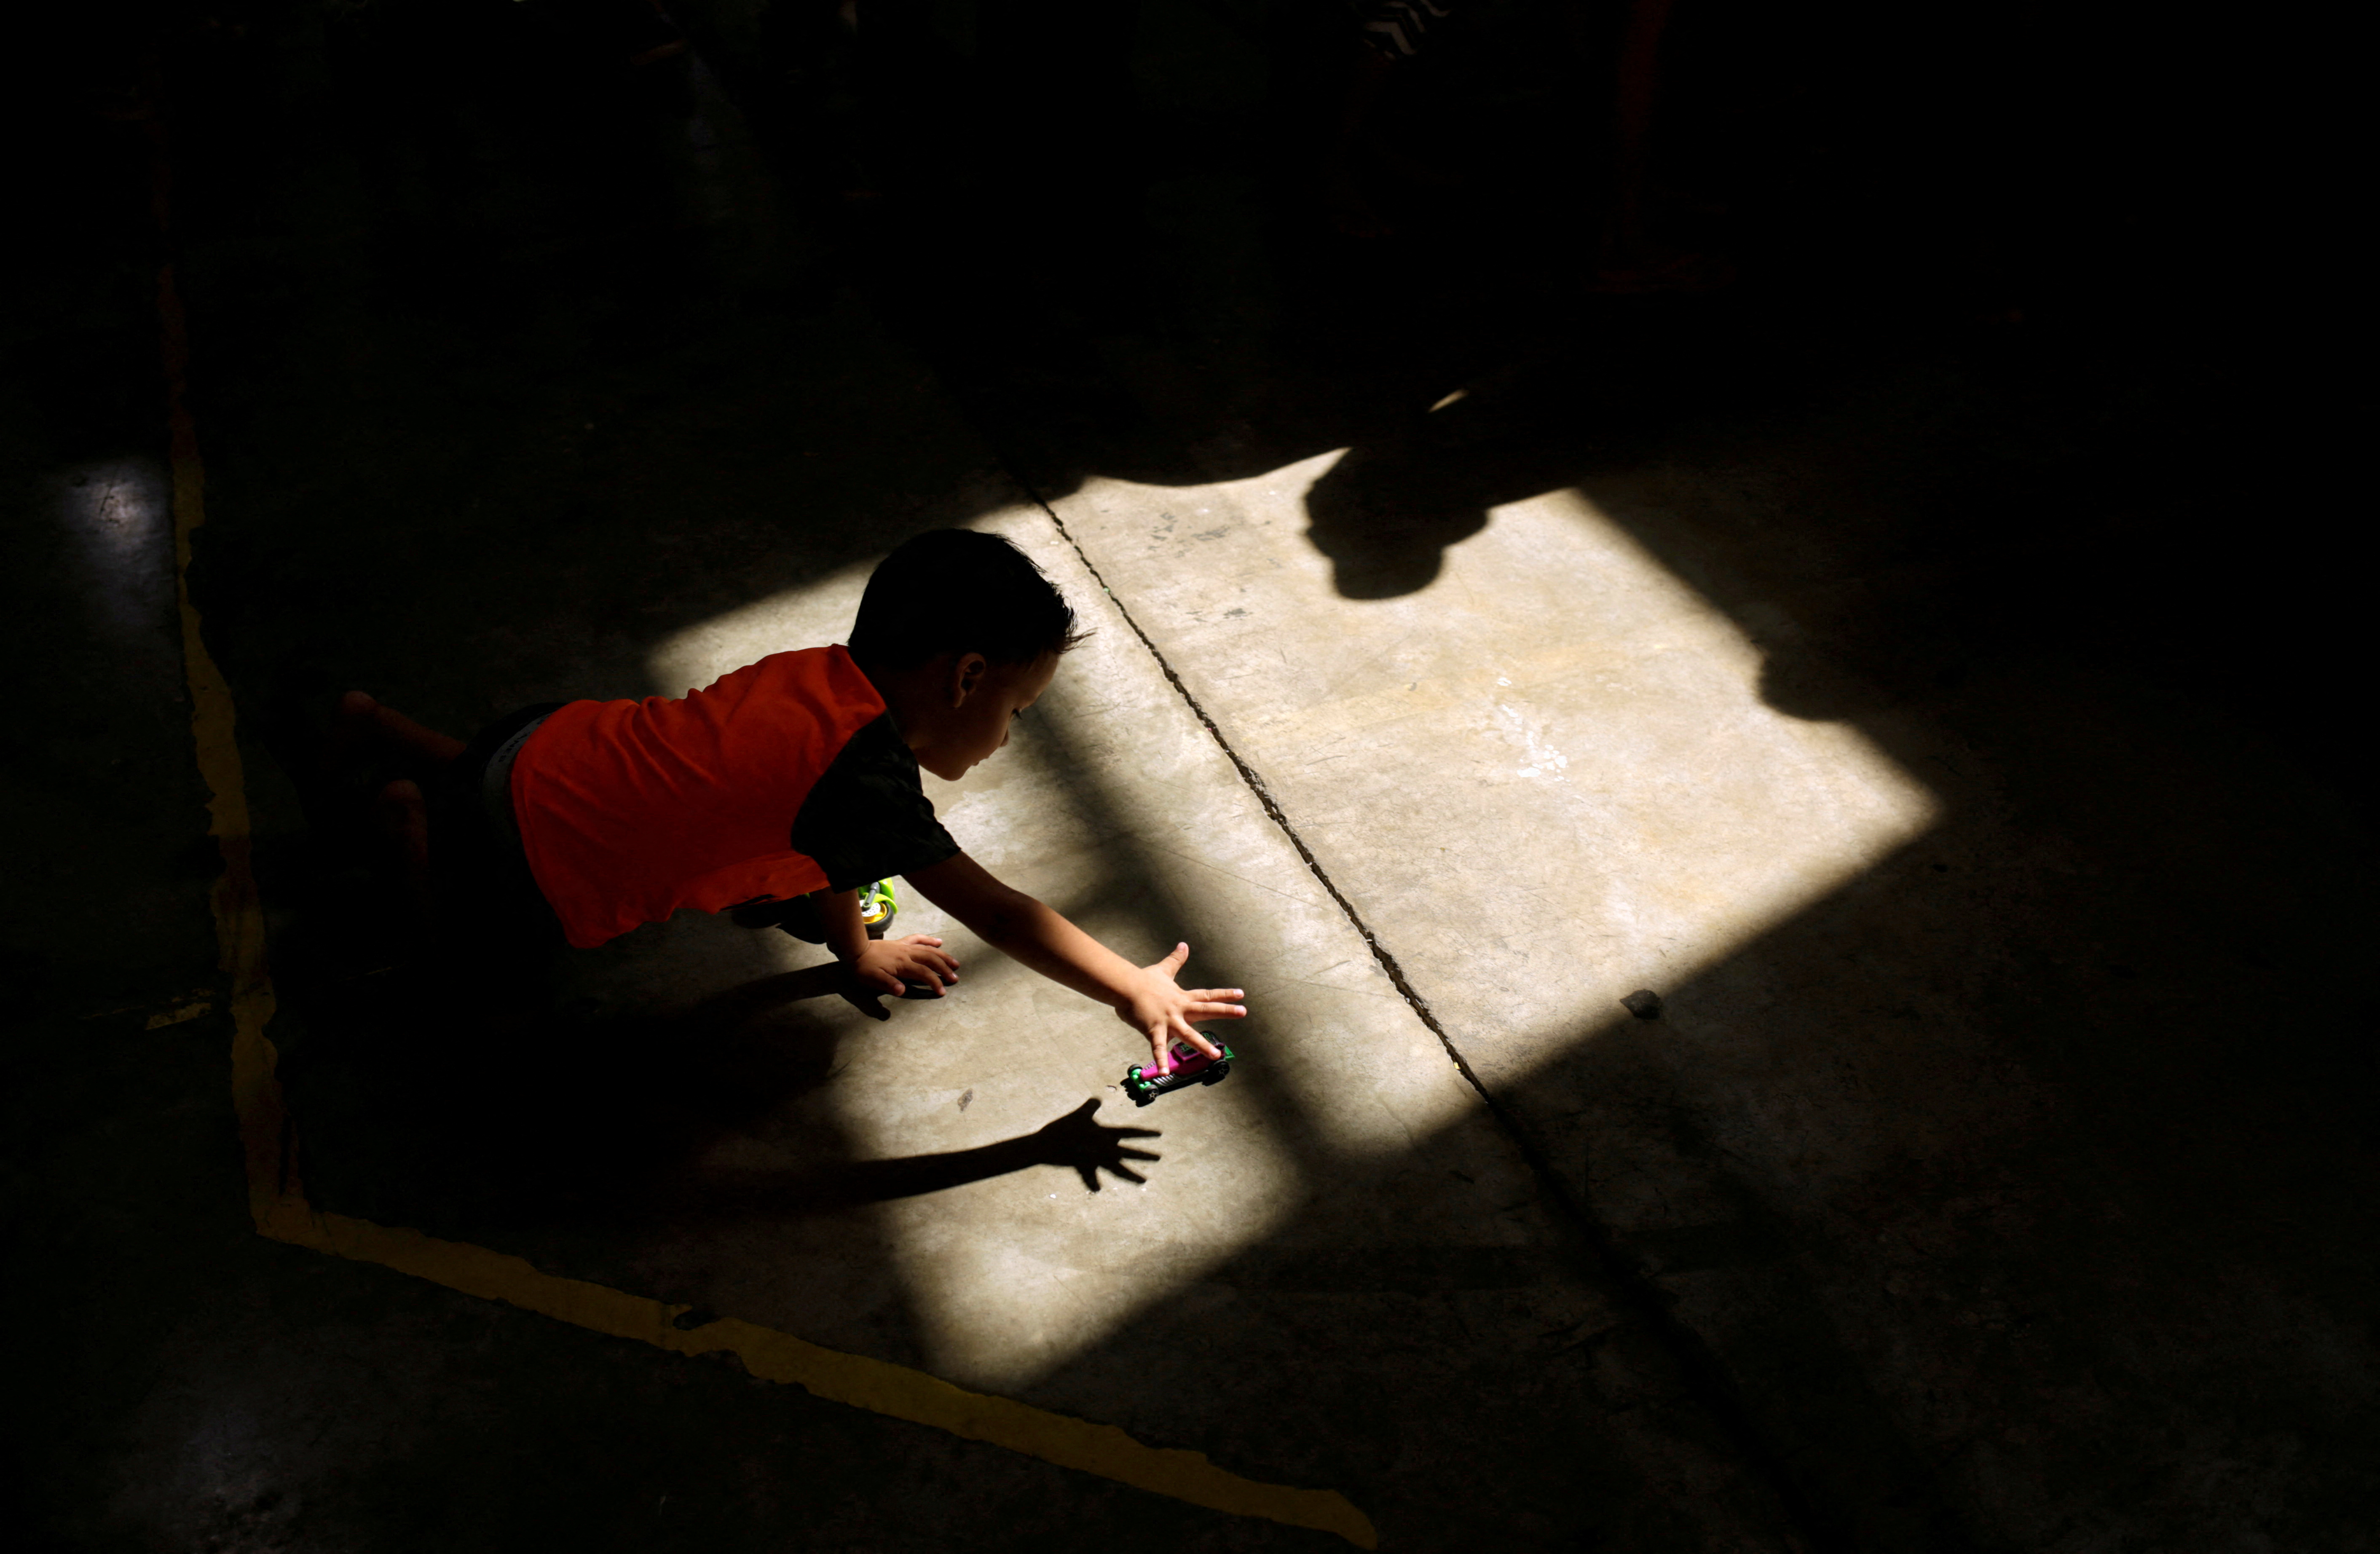 A migrant boy, who returned to Mexico with his parents from the U.S. under the Migrant Protection Protocols, plays at a migrant shelter run by the federal government in Ciudad Juarez